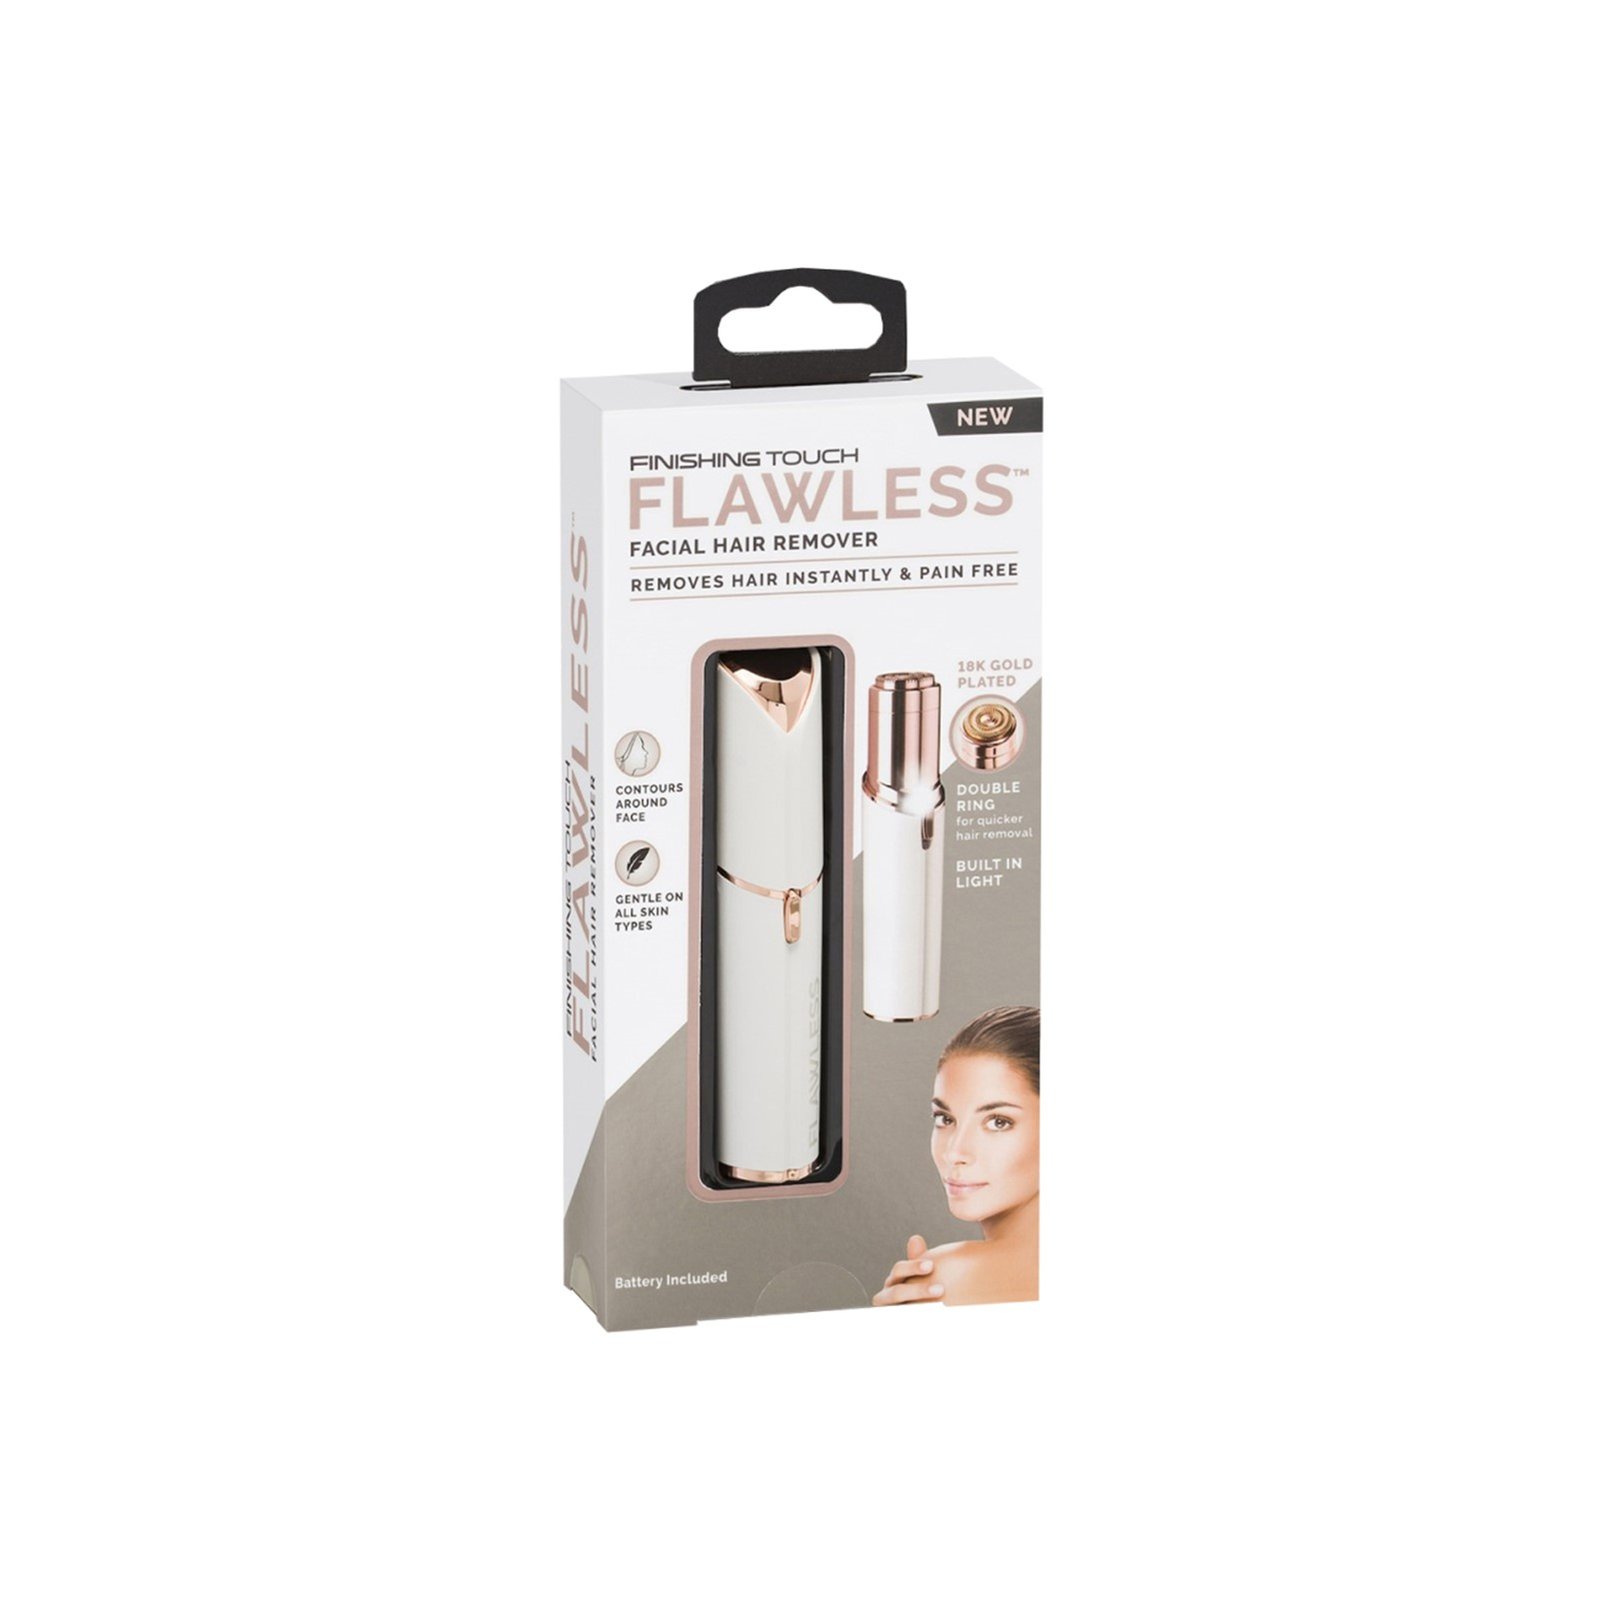 Finishing Touch Flawless Body Hair Remover - White/Gold, 1 ct - Kroger